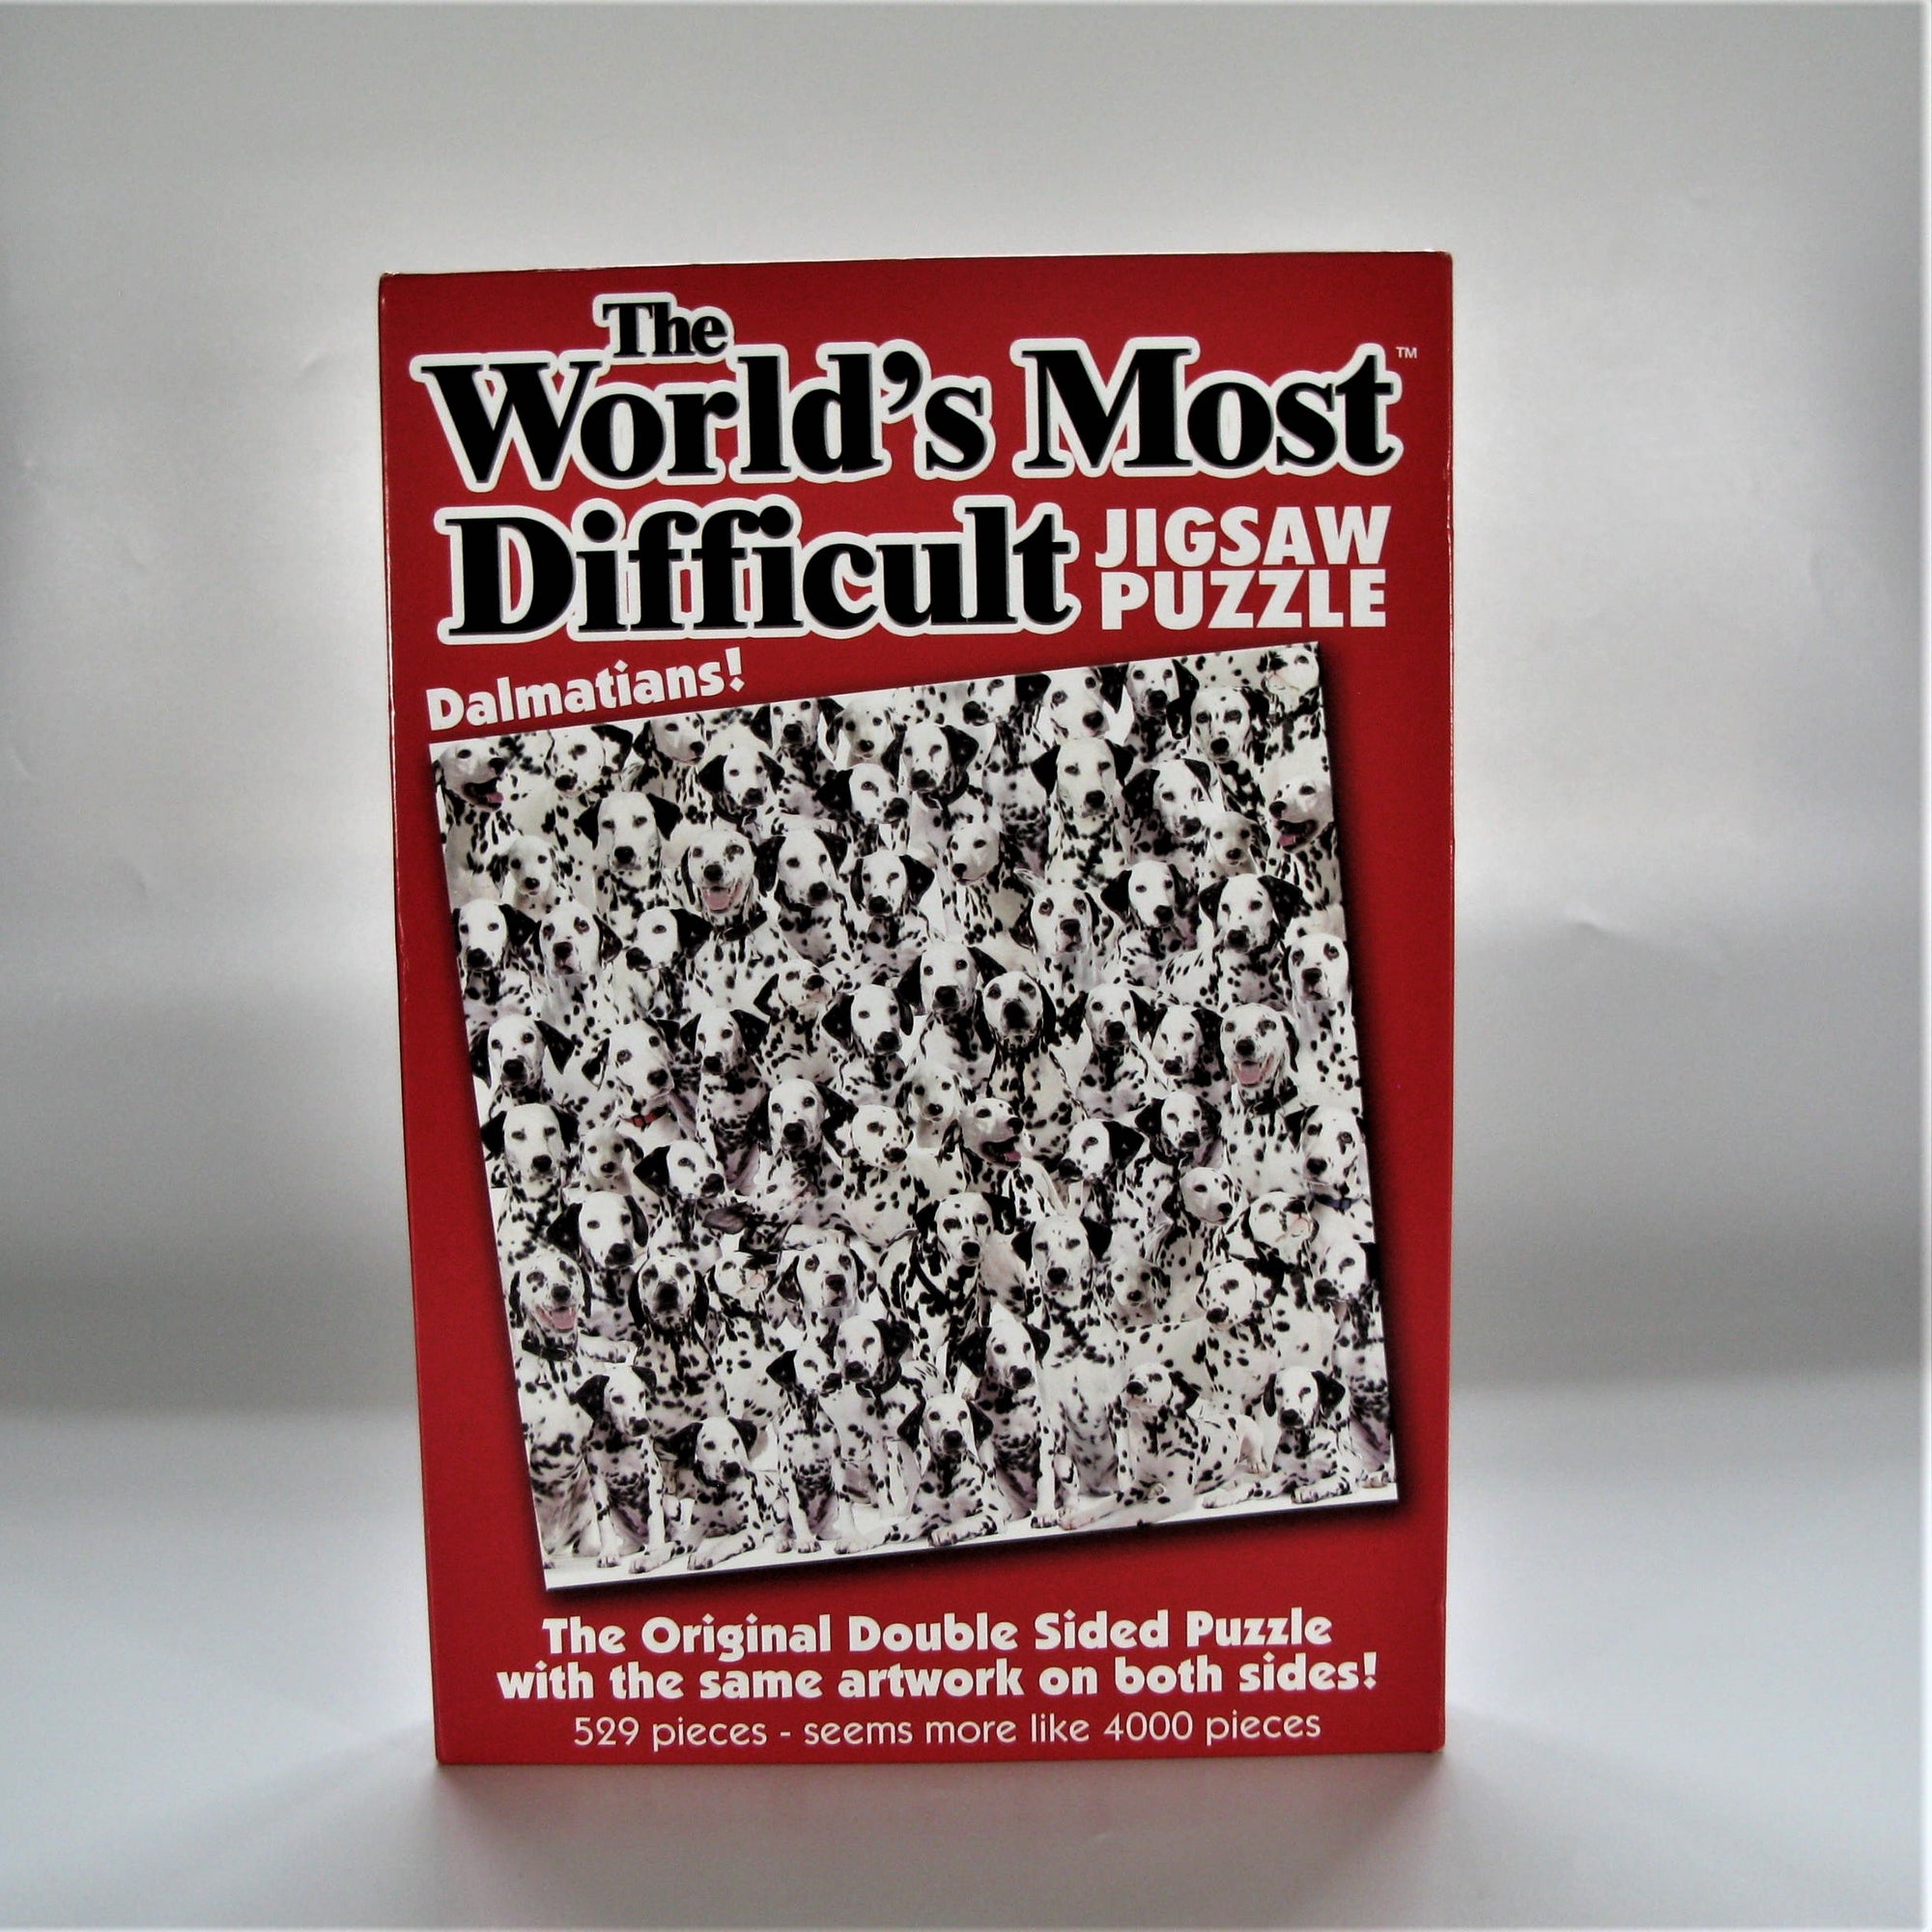 World's Most Difficult Jigsaw Puzzle/Dog EditionDouble Sided/529